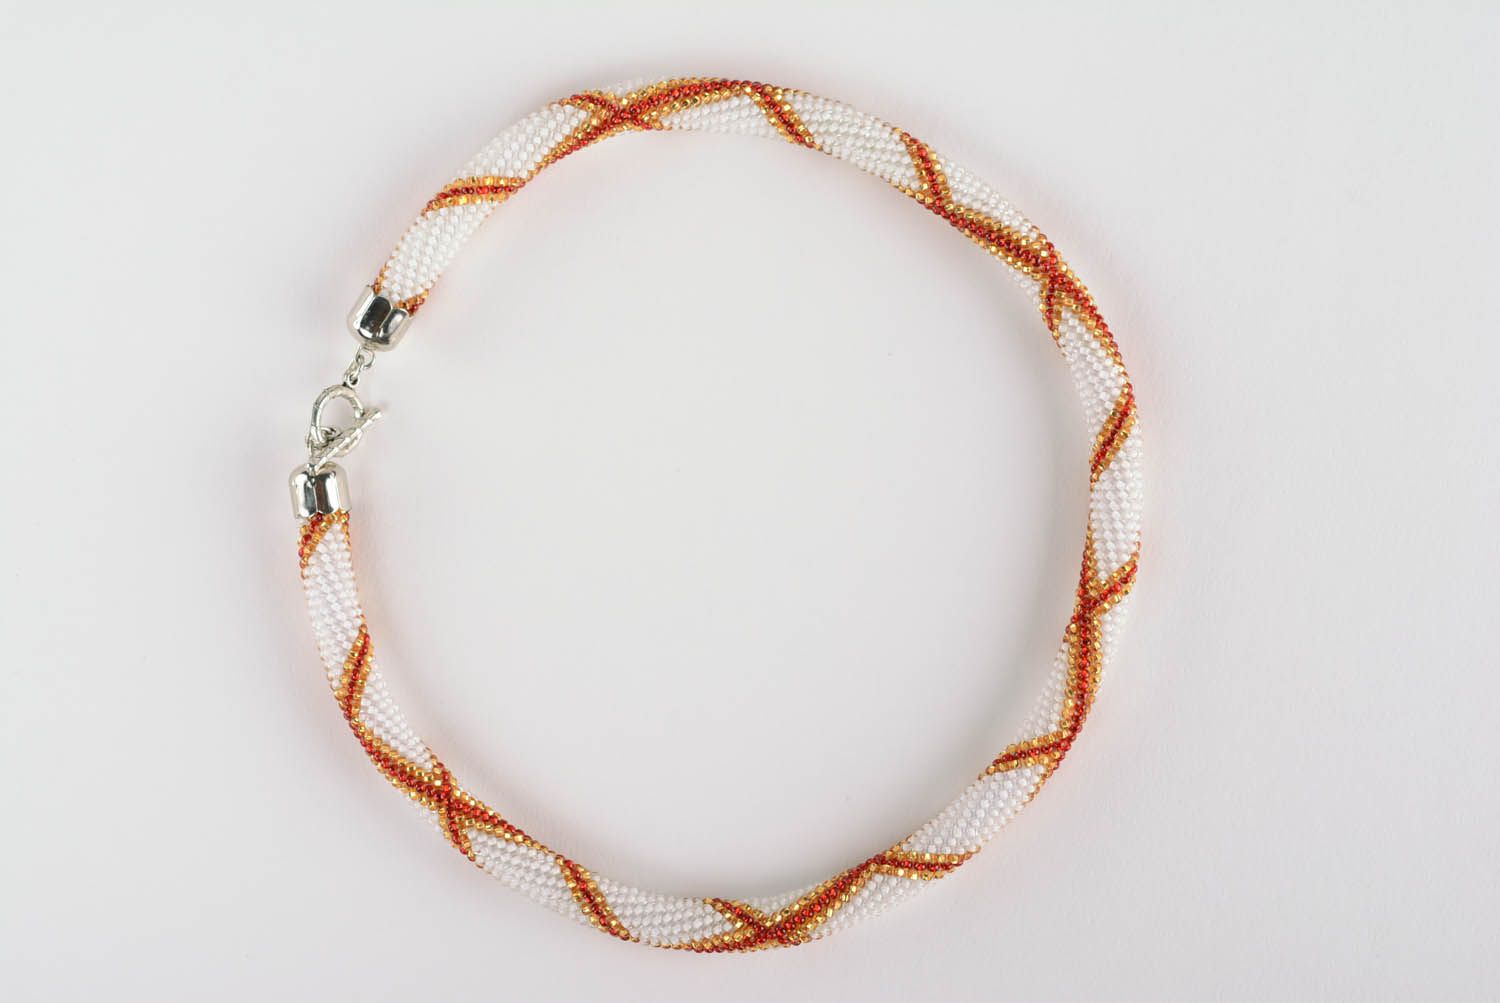 Handmade beaded cord necklace in white, red, and orange beads photo 4